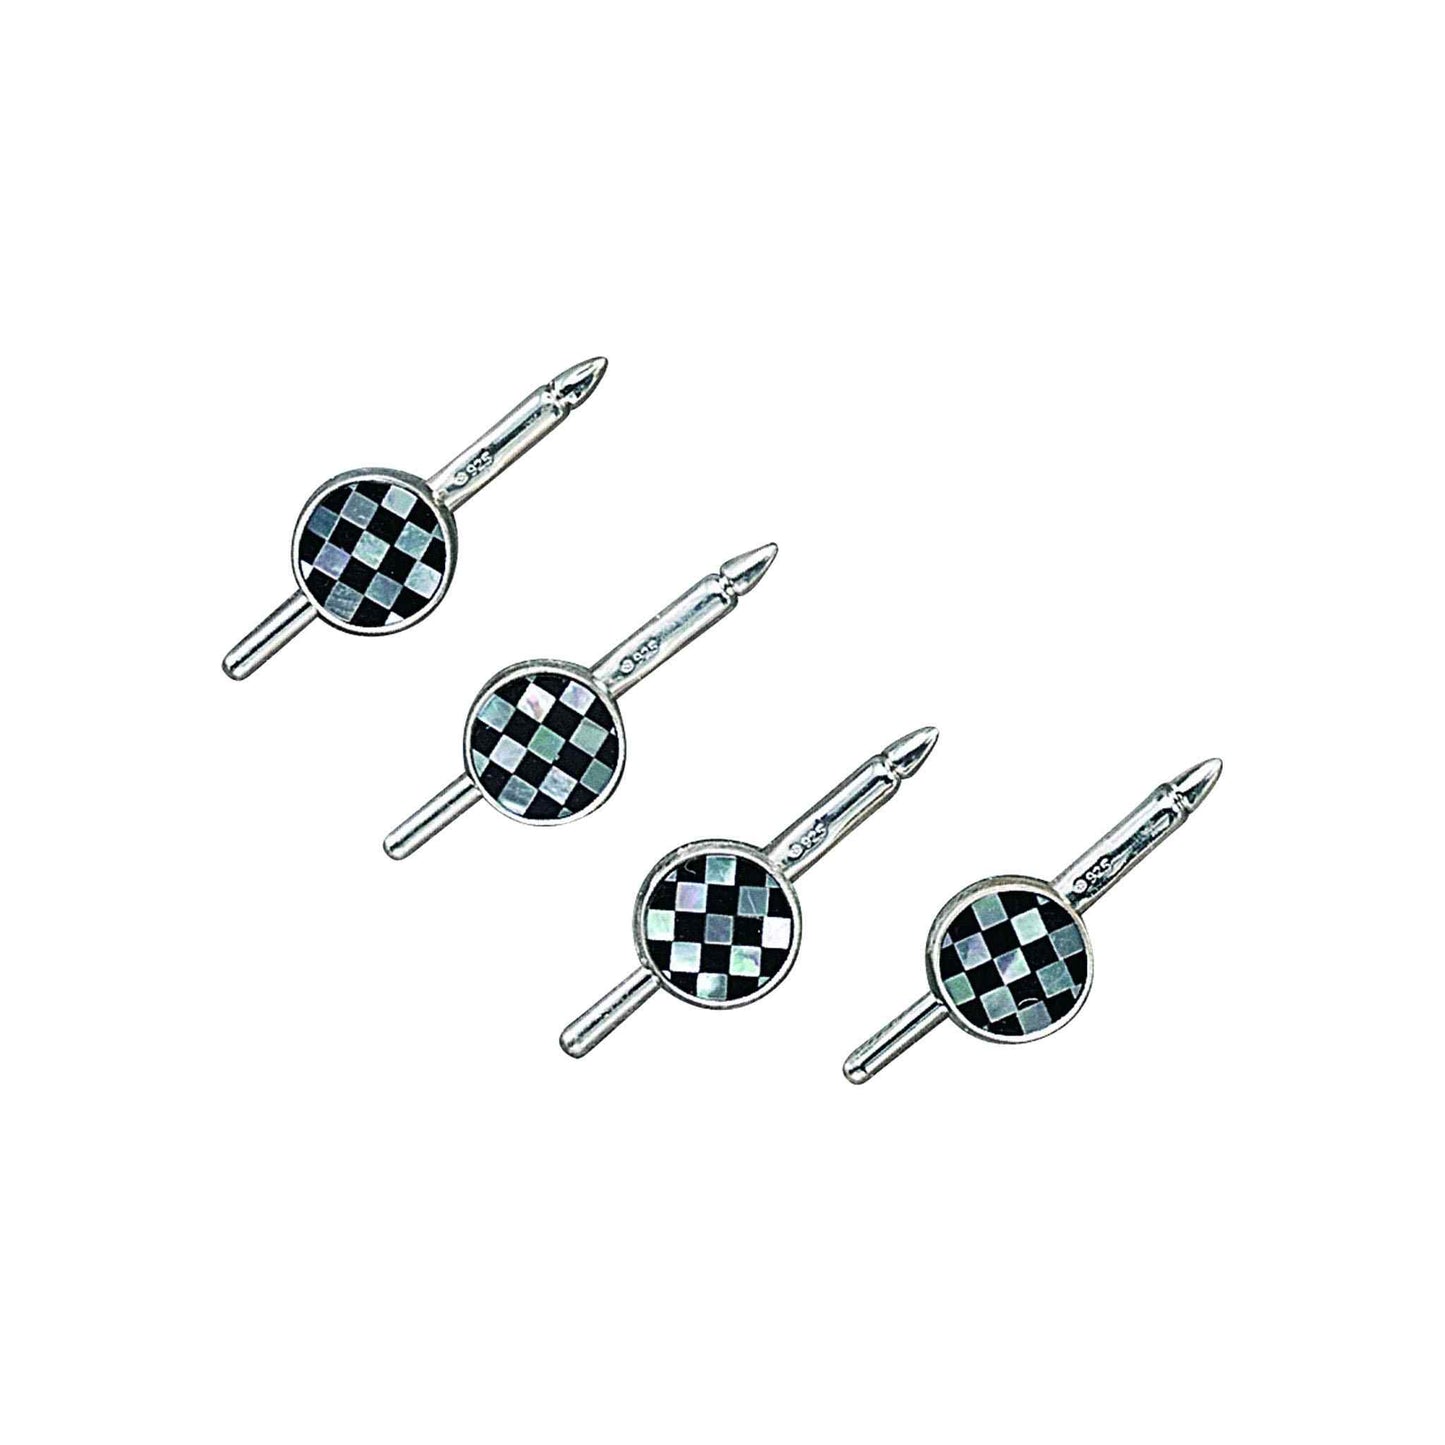 A four piece sterling silver 8mm round mother of pearl & onyx checkered trim stud set displayed on a neutral white background.